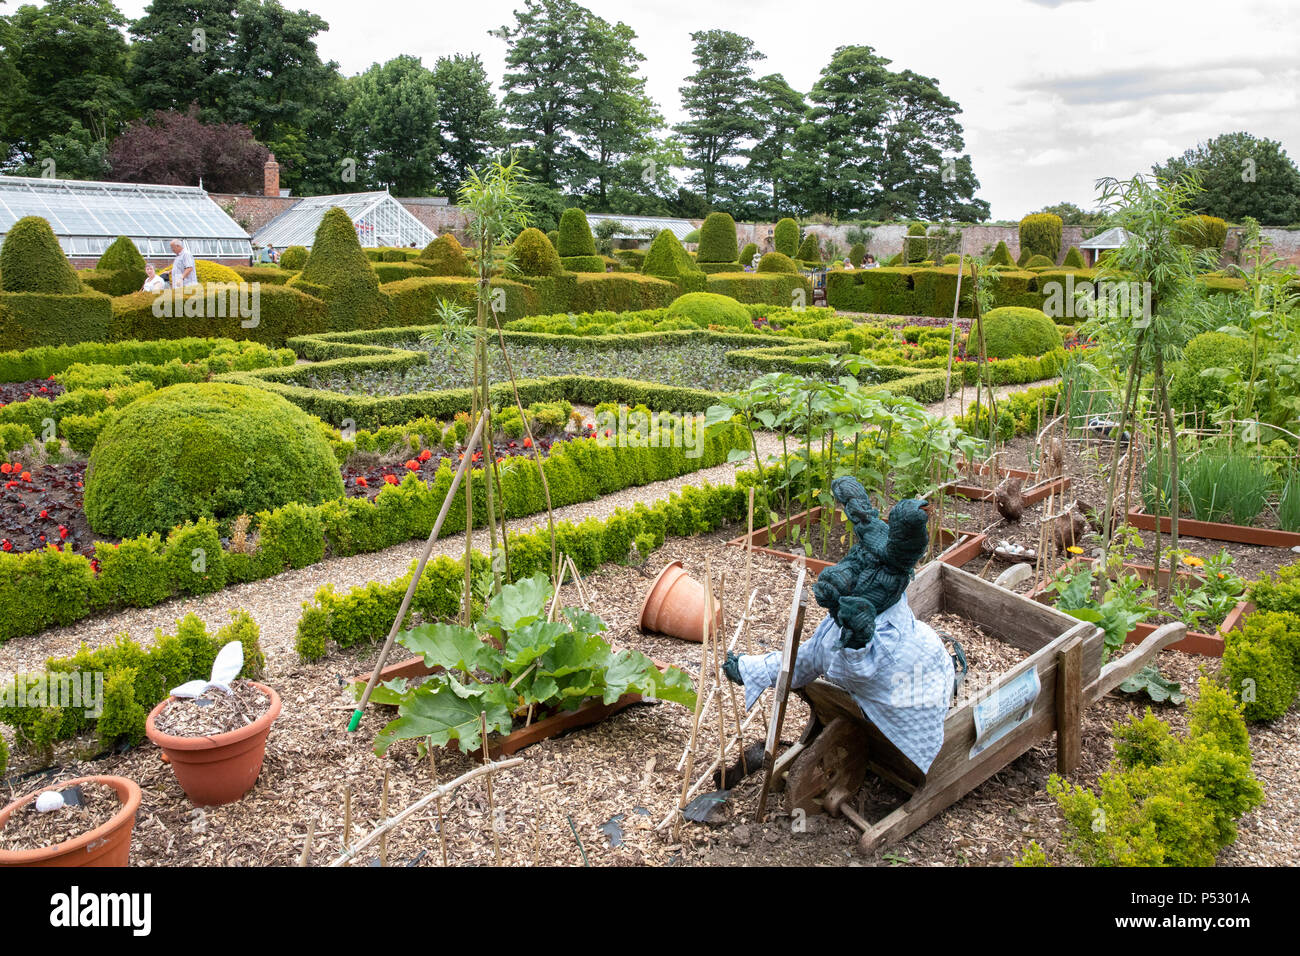 The gardens at Sewerby House, Near Bridlington, Uk Stock Photo